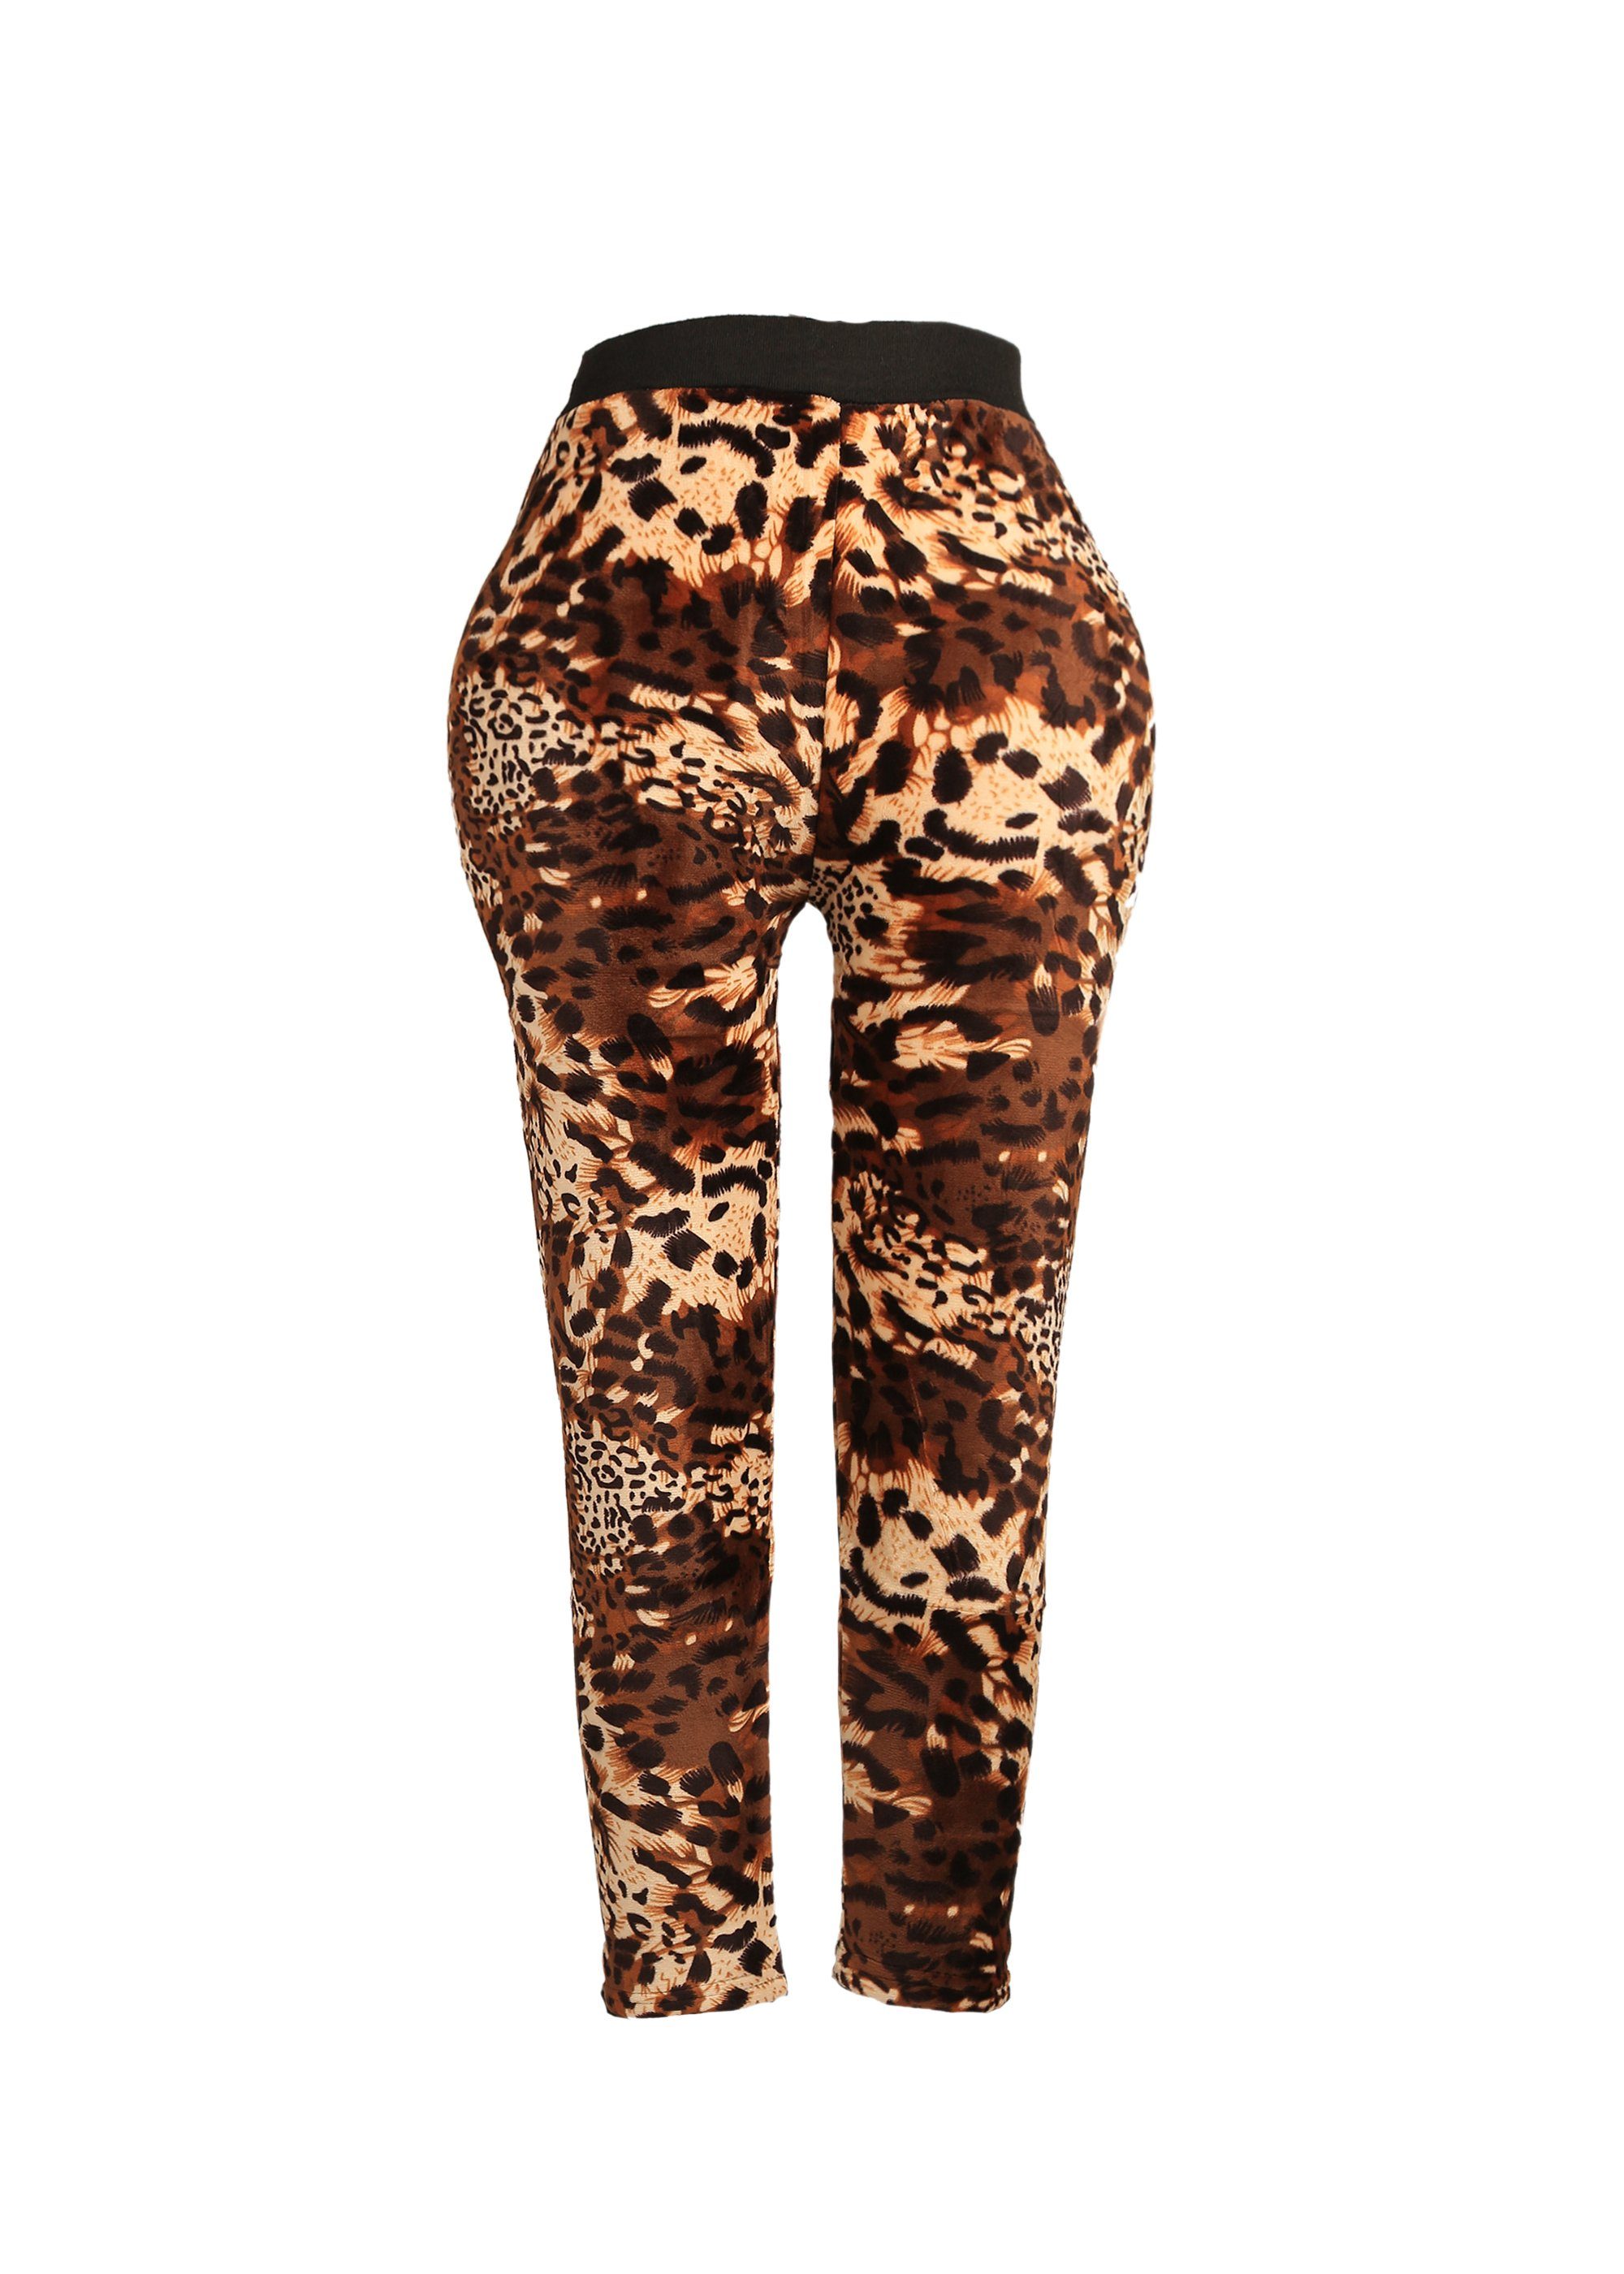 Family coolem Trends mit Thermoleggings Leopardenmuster